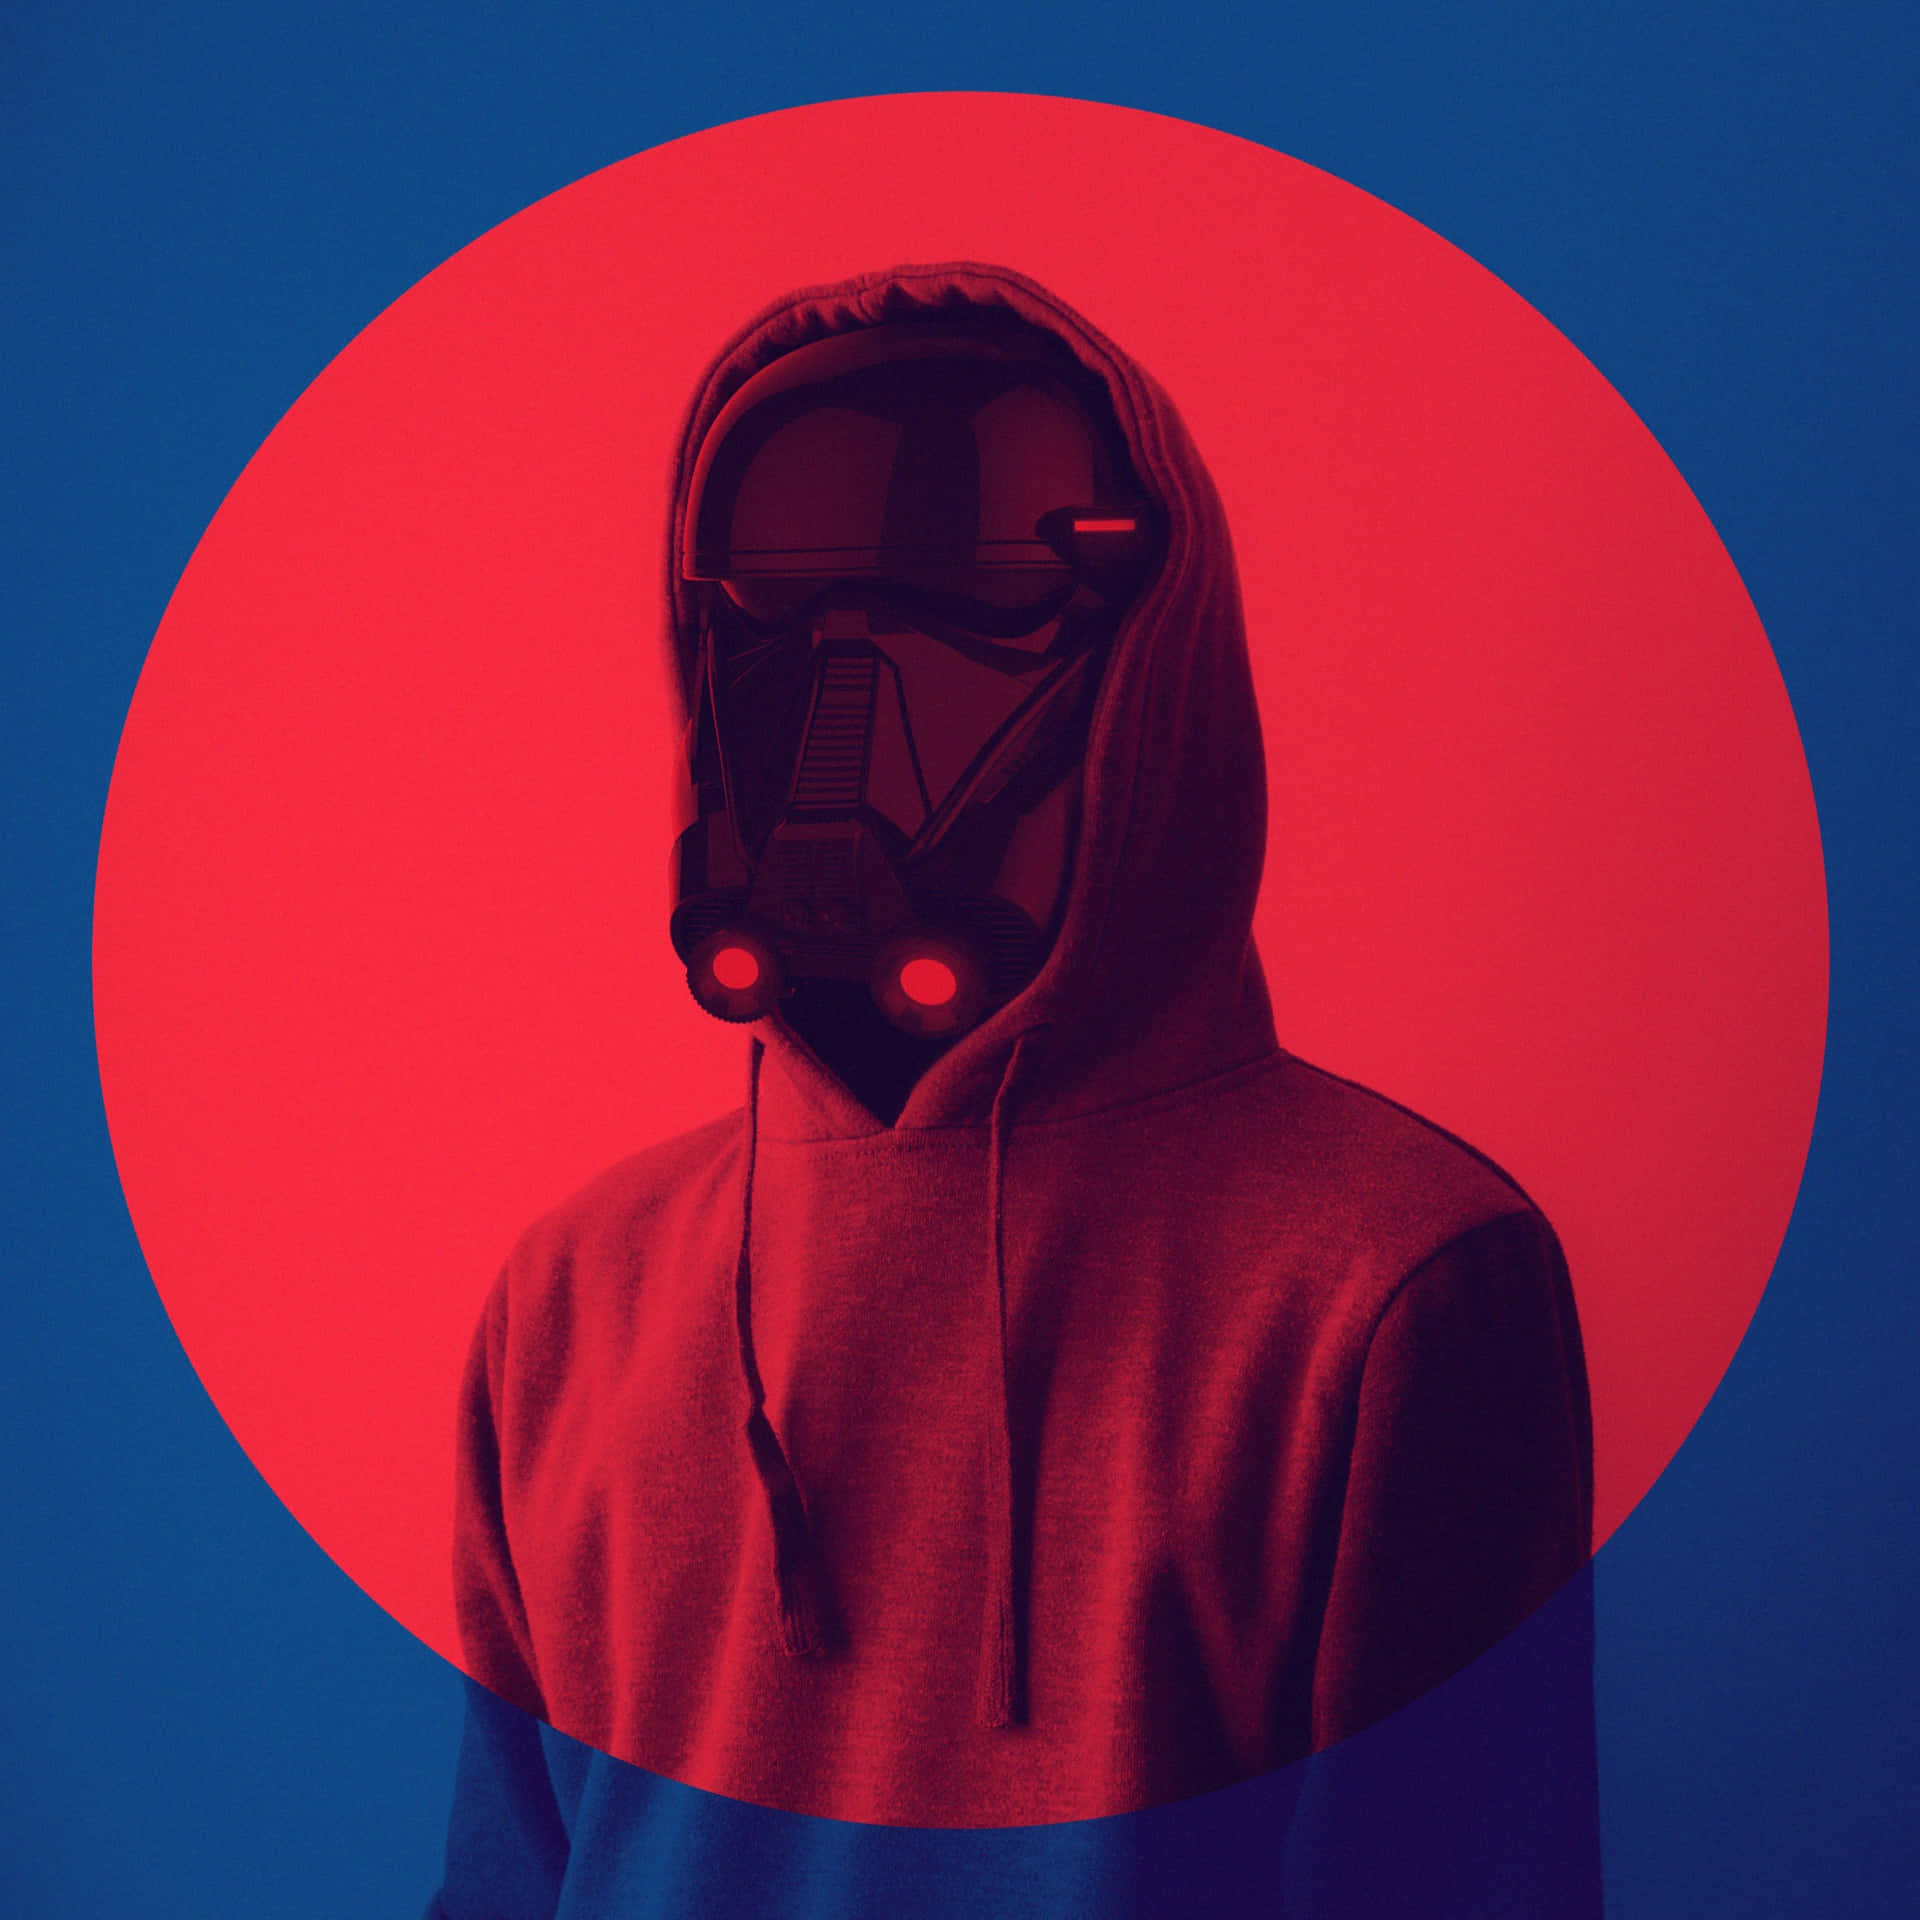 Red Hooded Figurewith Mask Pfp Wallpaper